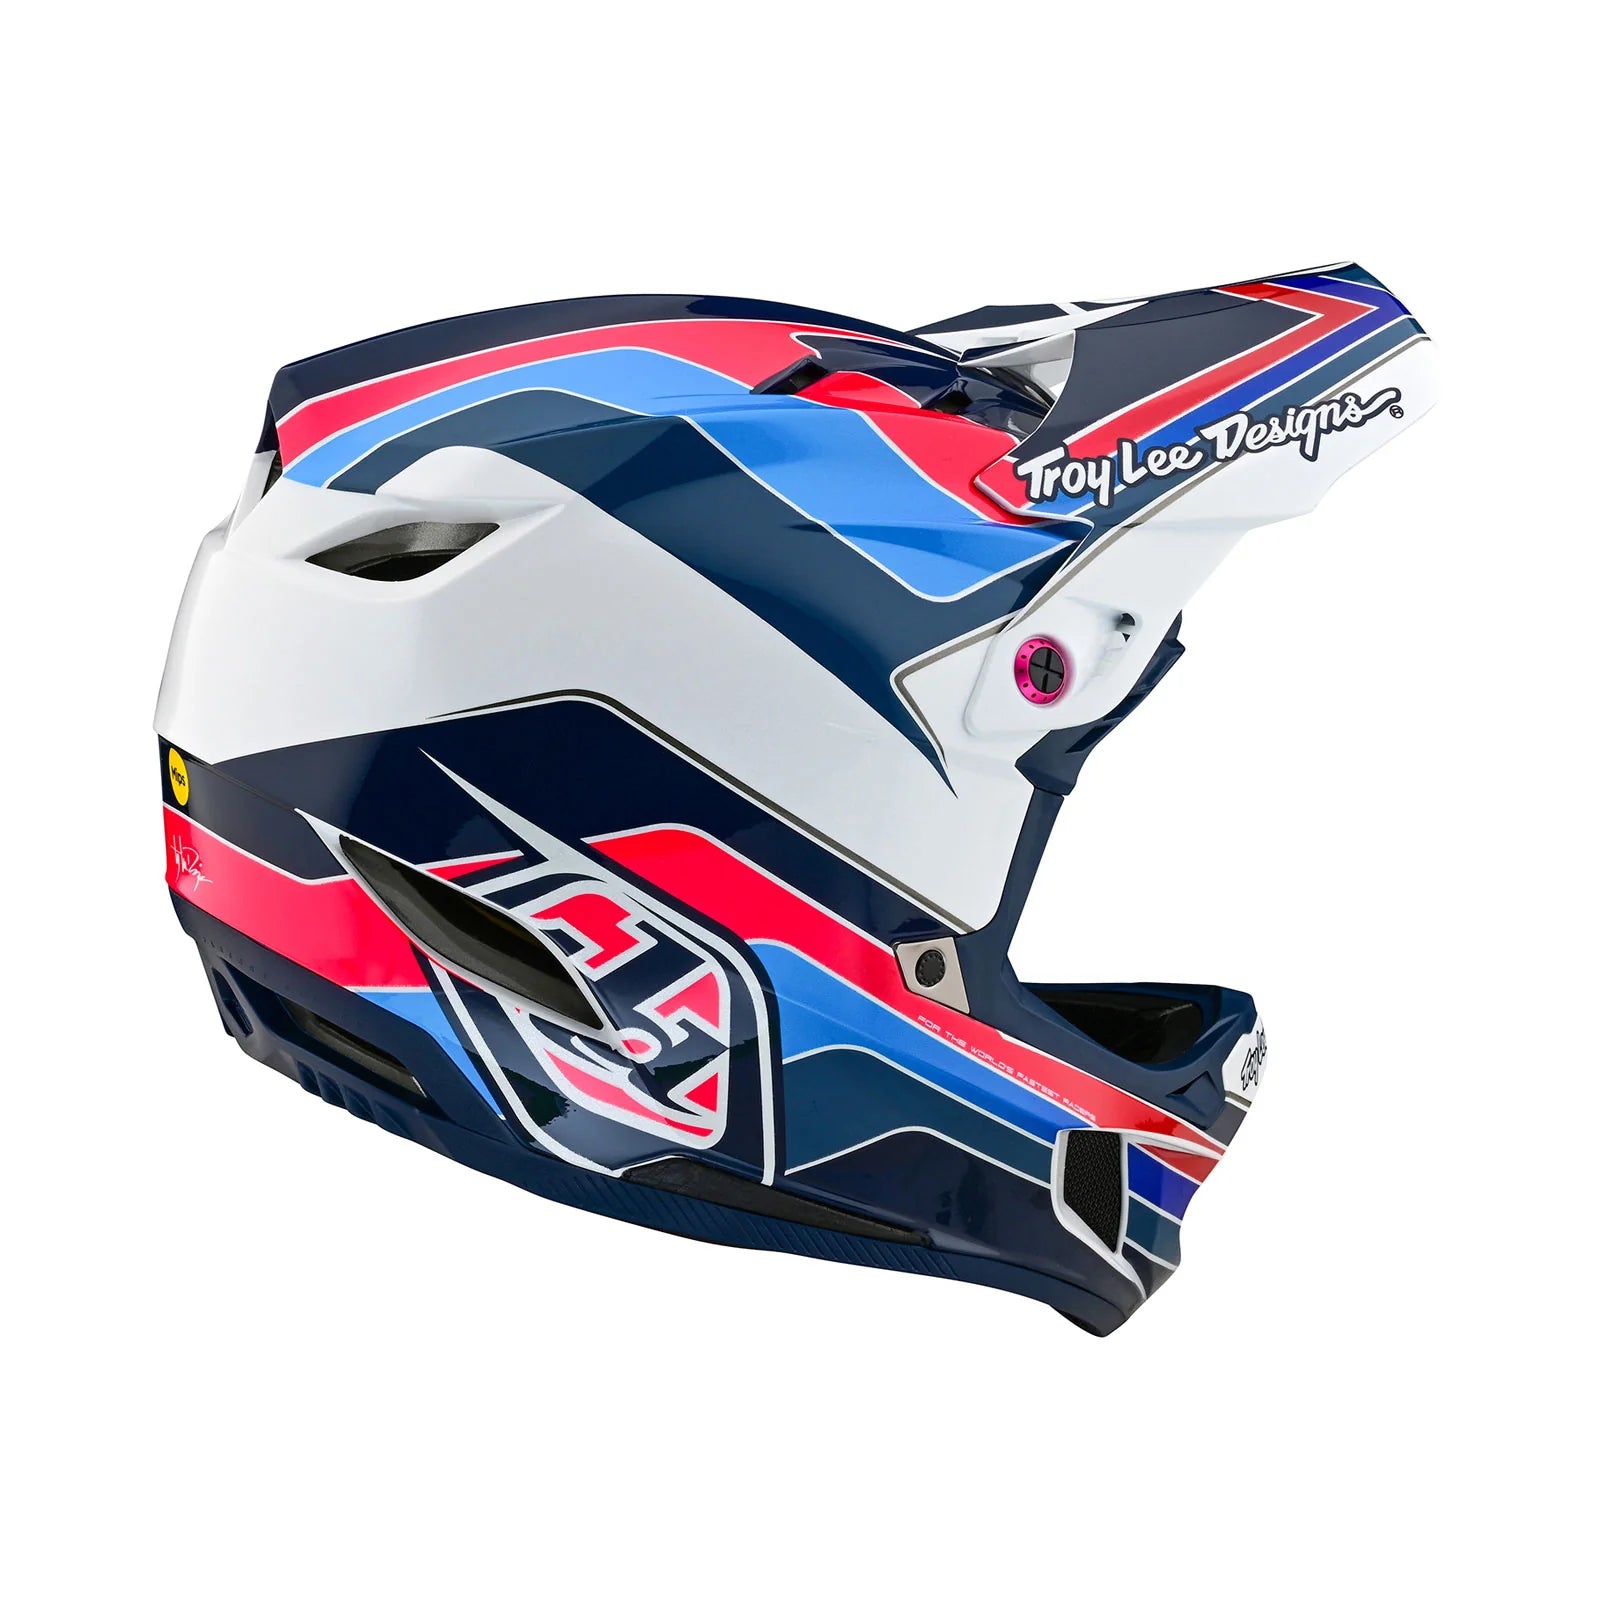 A safety helmet with a red, blue, and white design by TLD D4 AS Polyacrylite Helmet W/MIPS Block Blue / White.